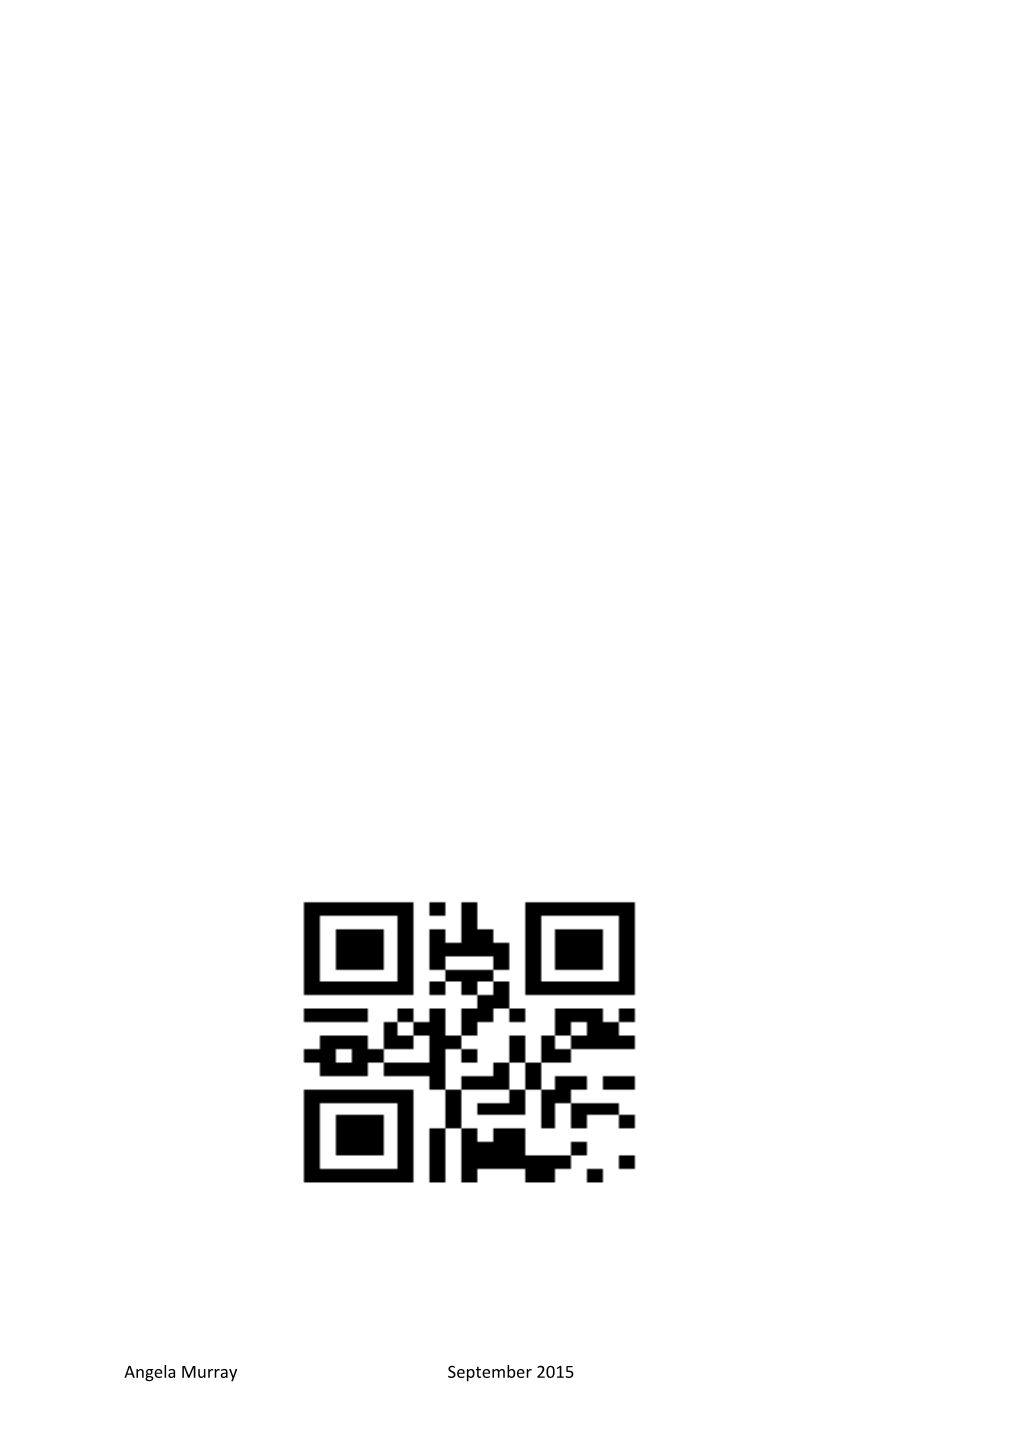 1. What Are QR Codes?